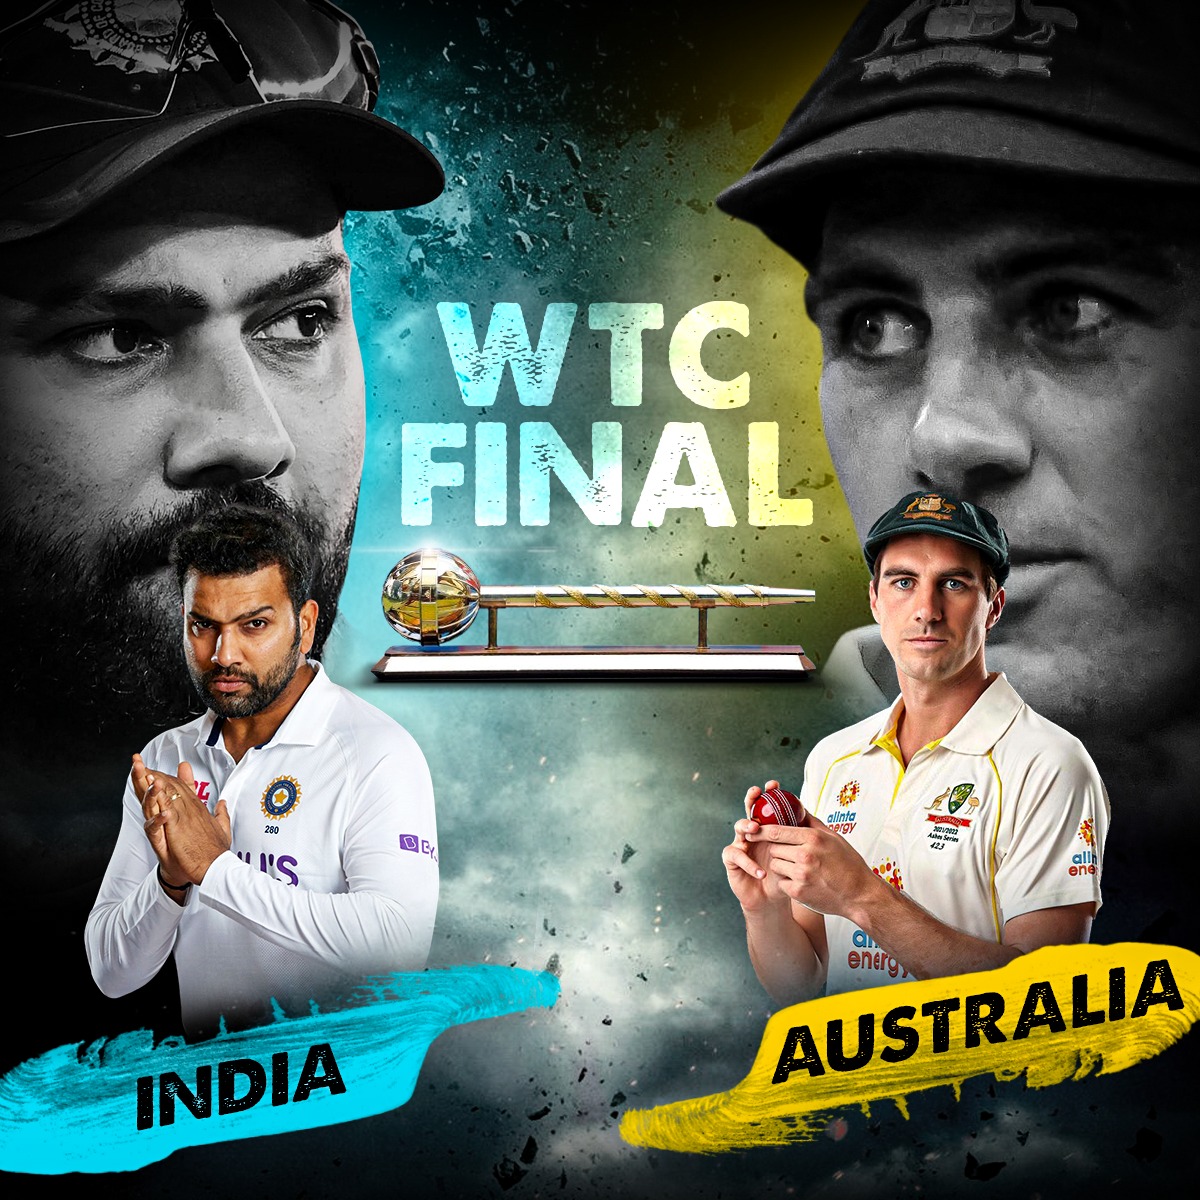 100MB on Twitter: "🗓️ - 7th June 2023 🏟️ - The Oval India will take on Australia in the WTC final. 🏏 #INDvAUS #WTC2023 https://t.co/9wFAyc1Yhi" / Twitter